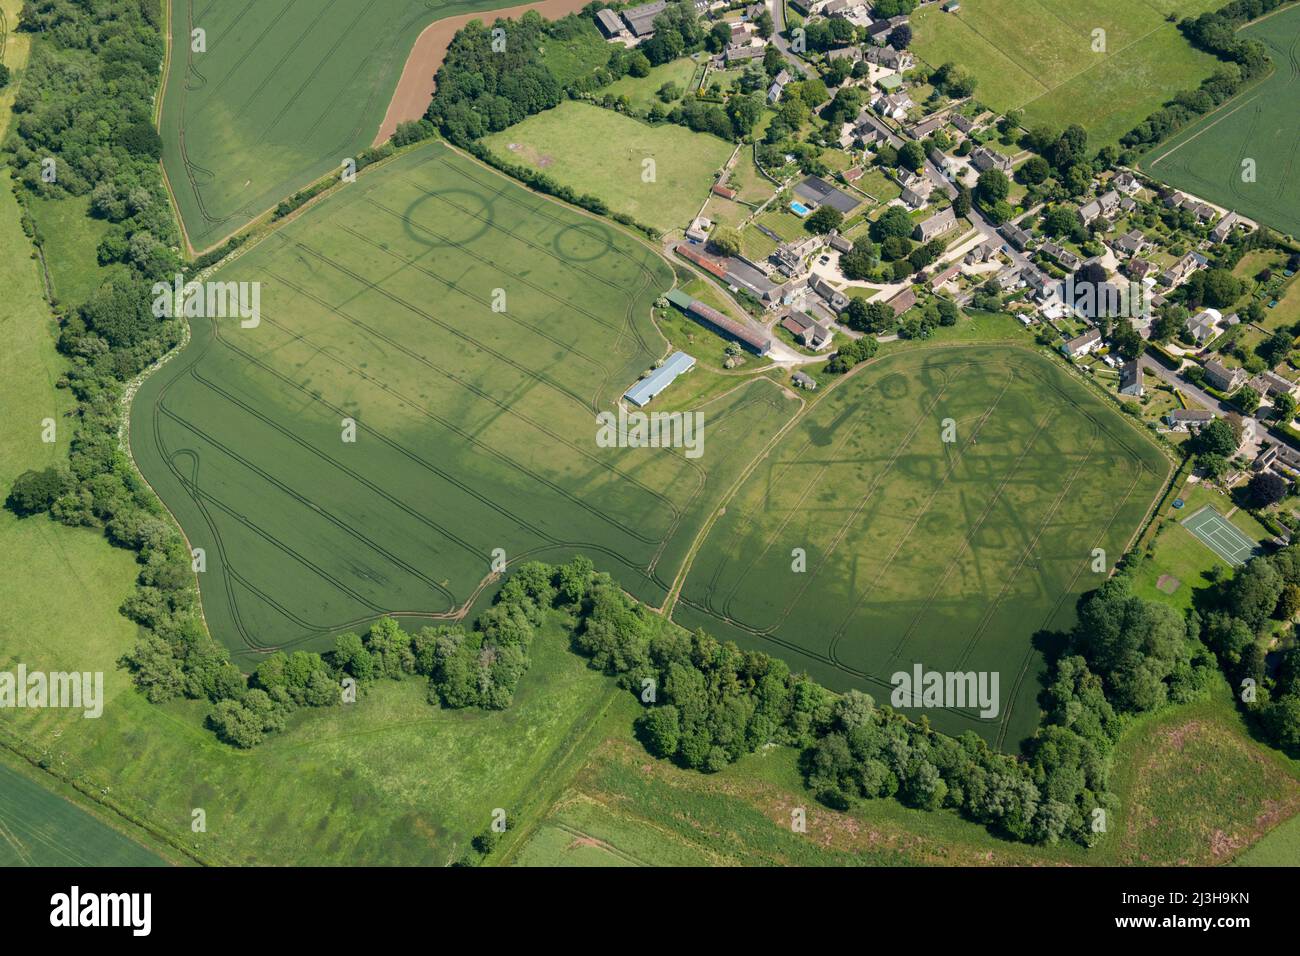 A possible Prehistoric or Roman settlement and probable Bronze Age round barrows in Marston Meysey, Wiltshire, 2015. Stock Photo